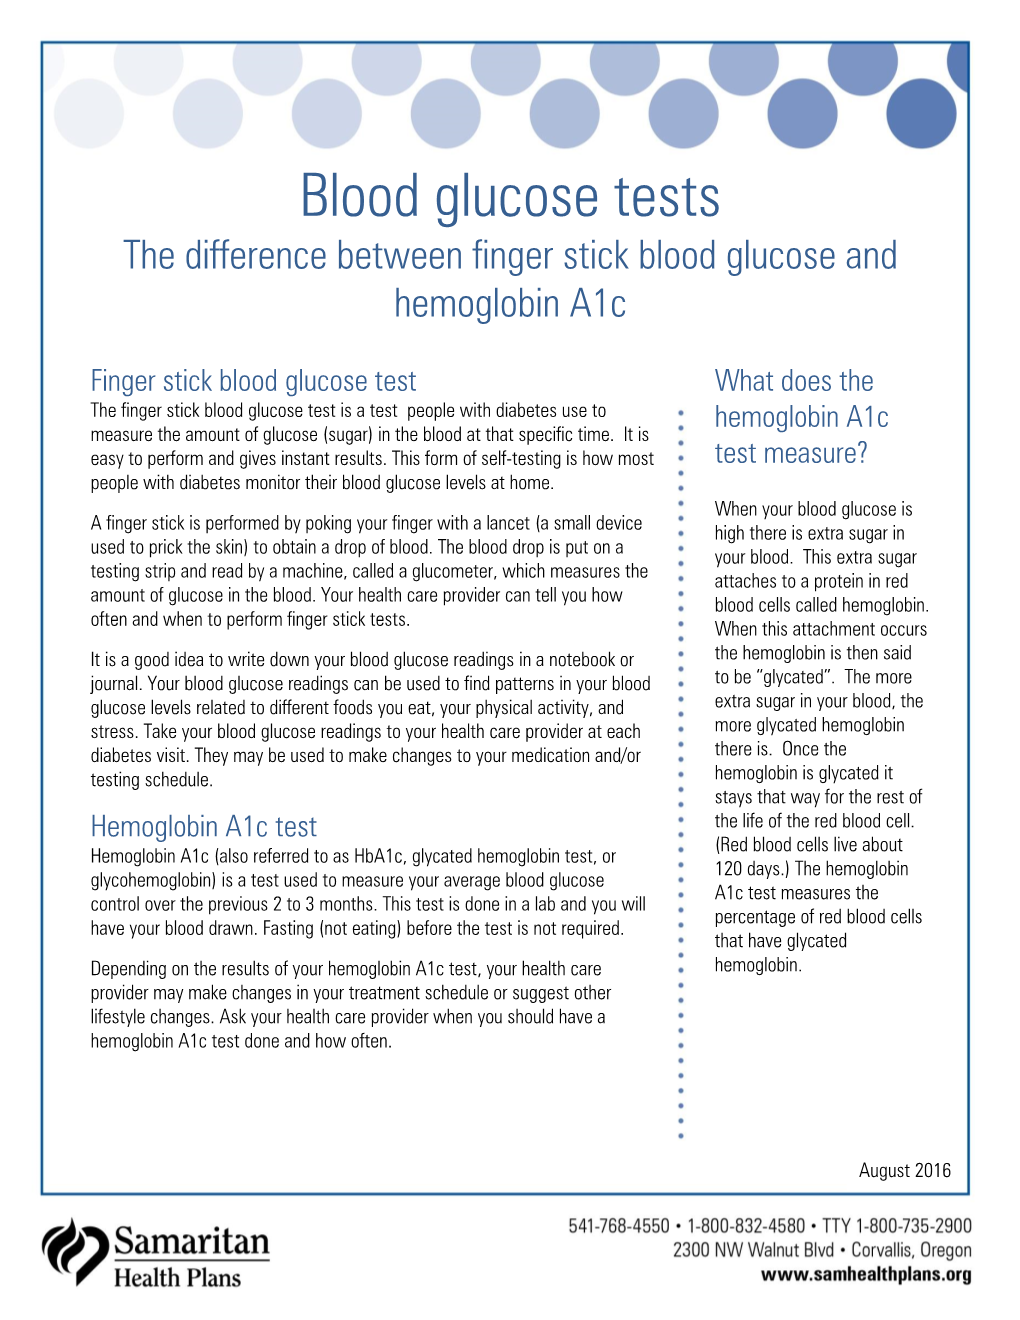 Blood Glucose Tests the Difference Between Finger Stick Blood Glucose